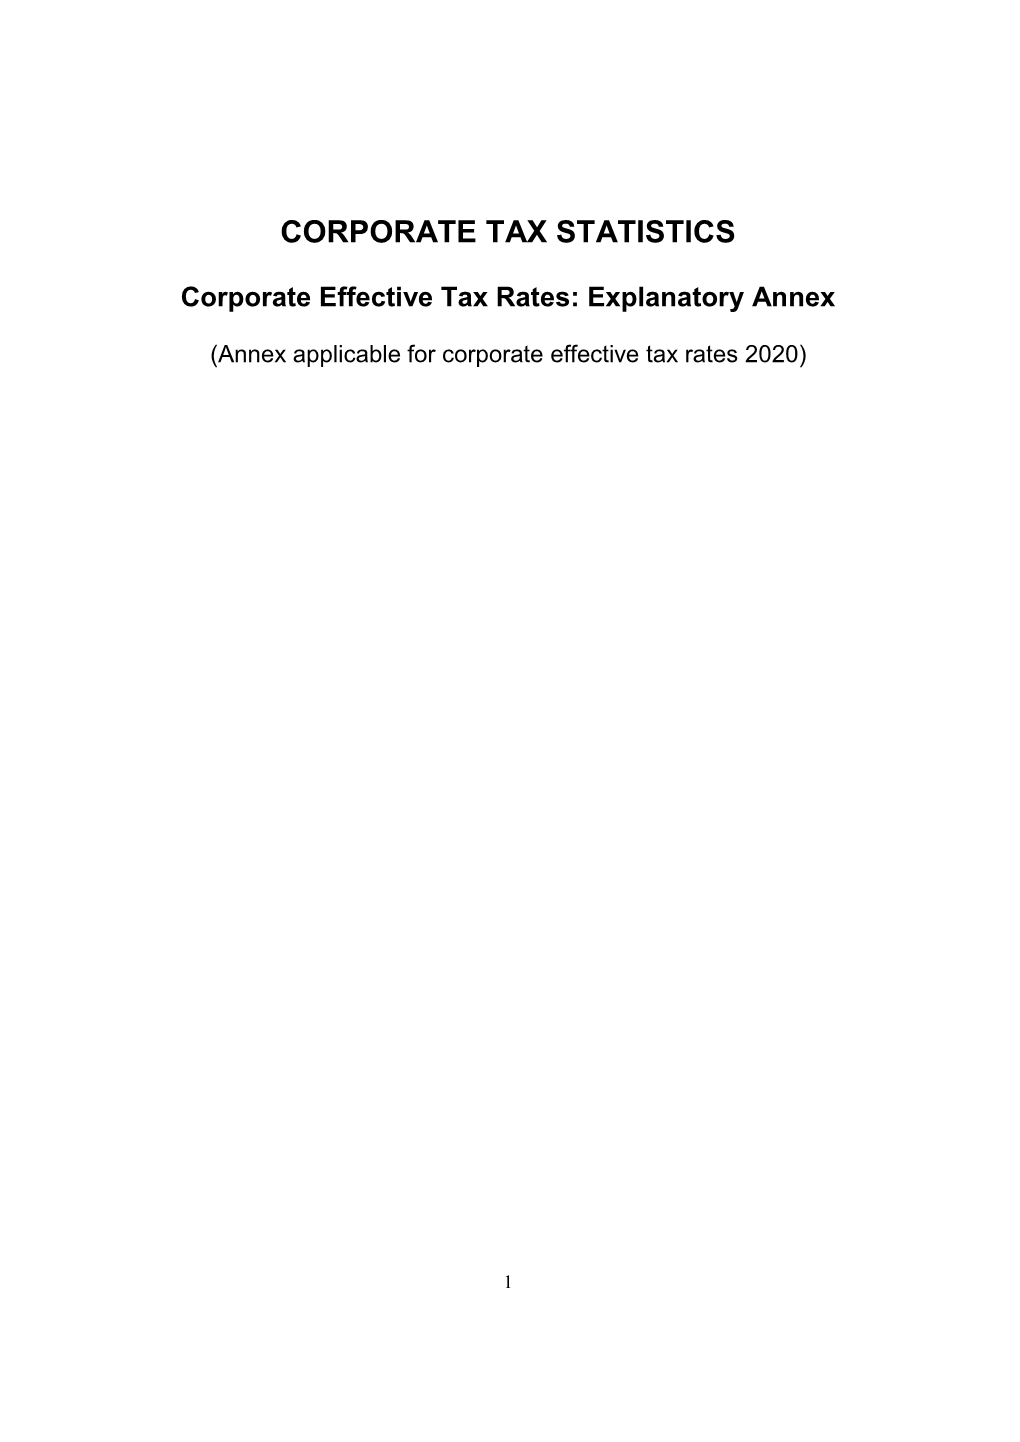 Corporate Effective Tax Rates Explanatory Annex